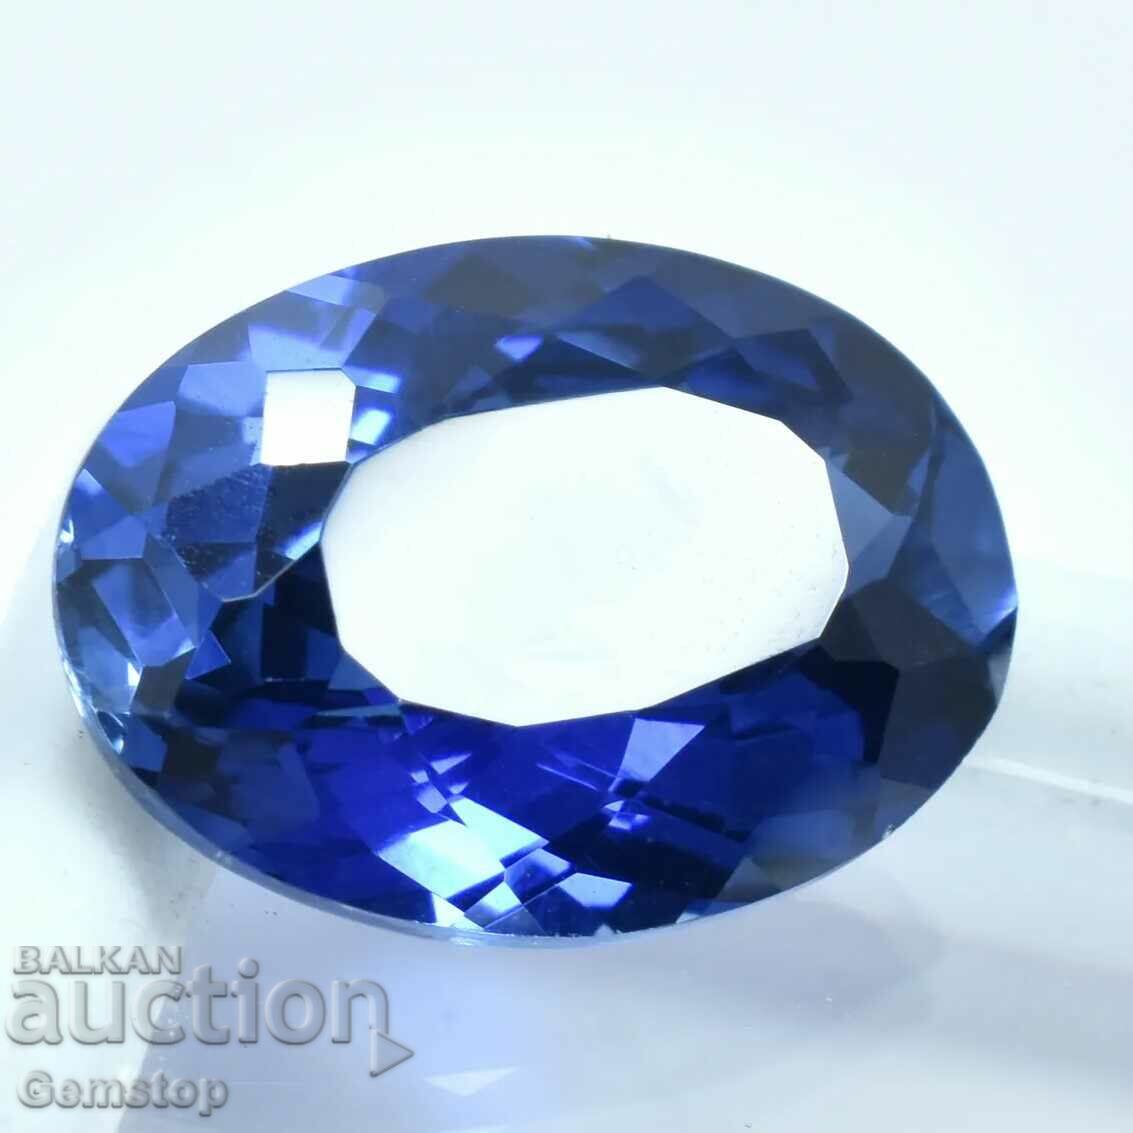 BZC! 10.80 ct natural tanzanite oval cert. GGL from 1 st!